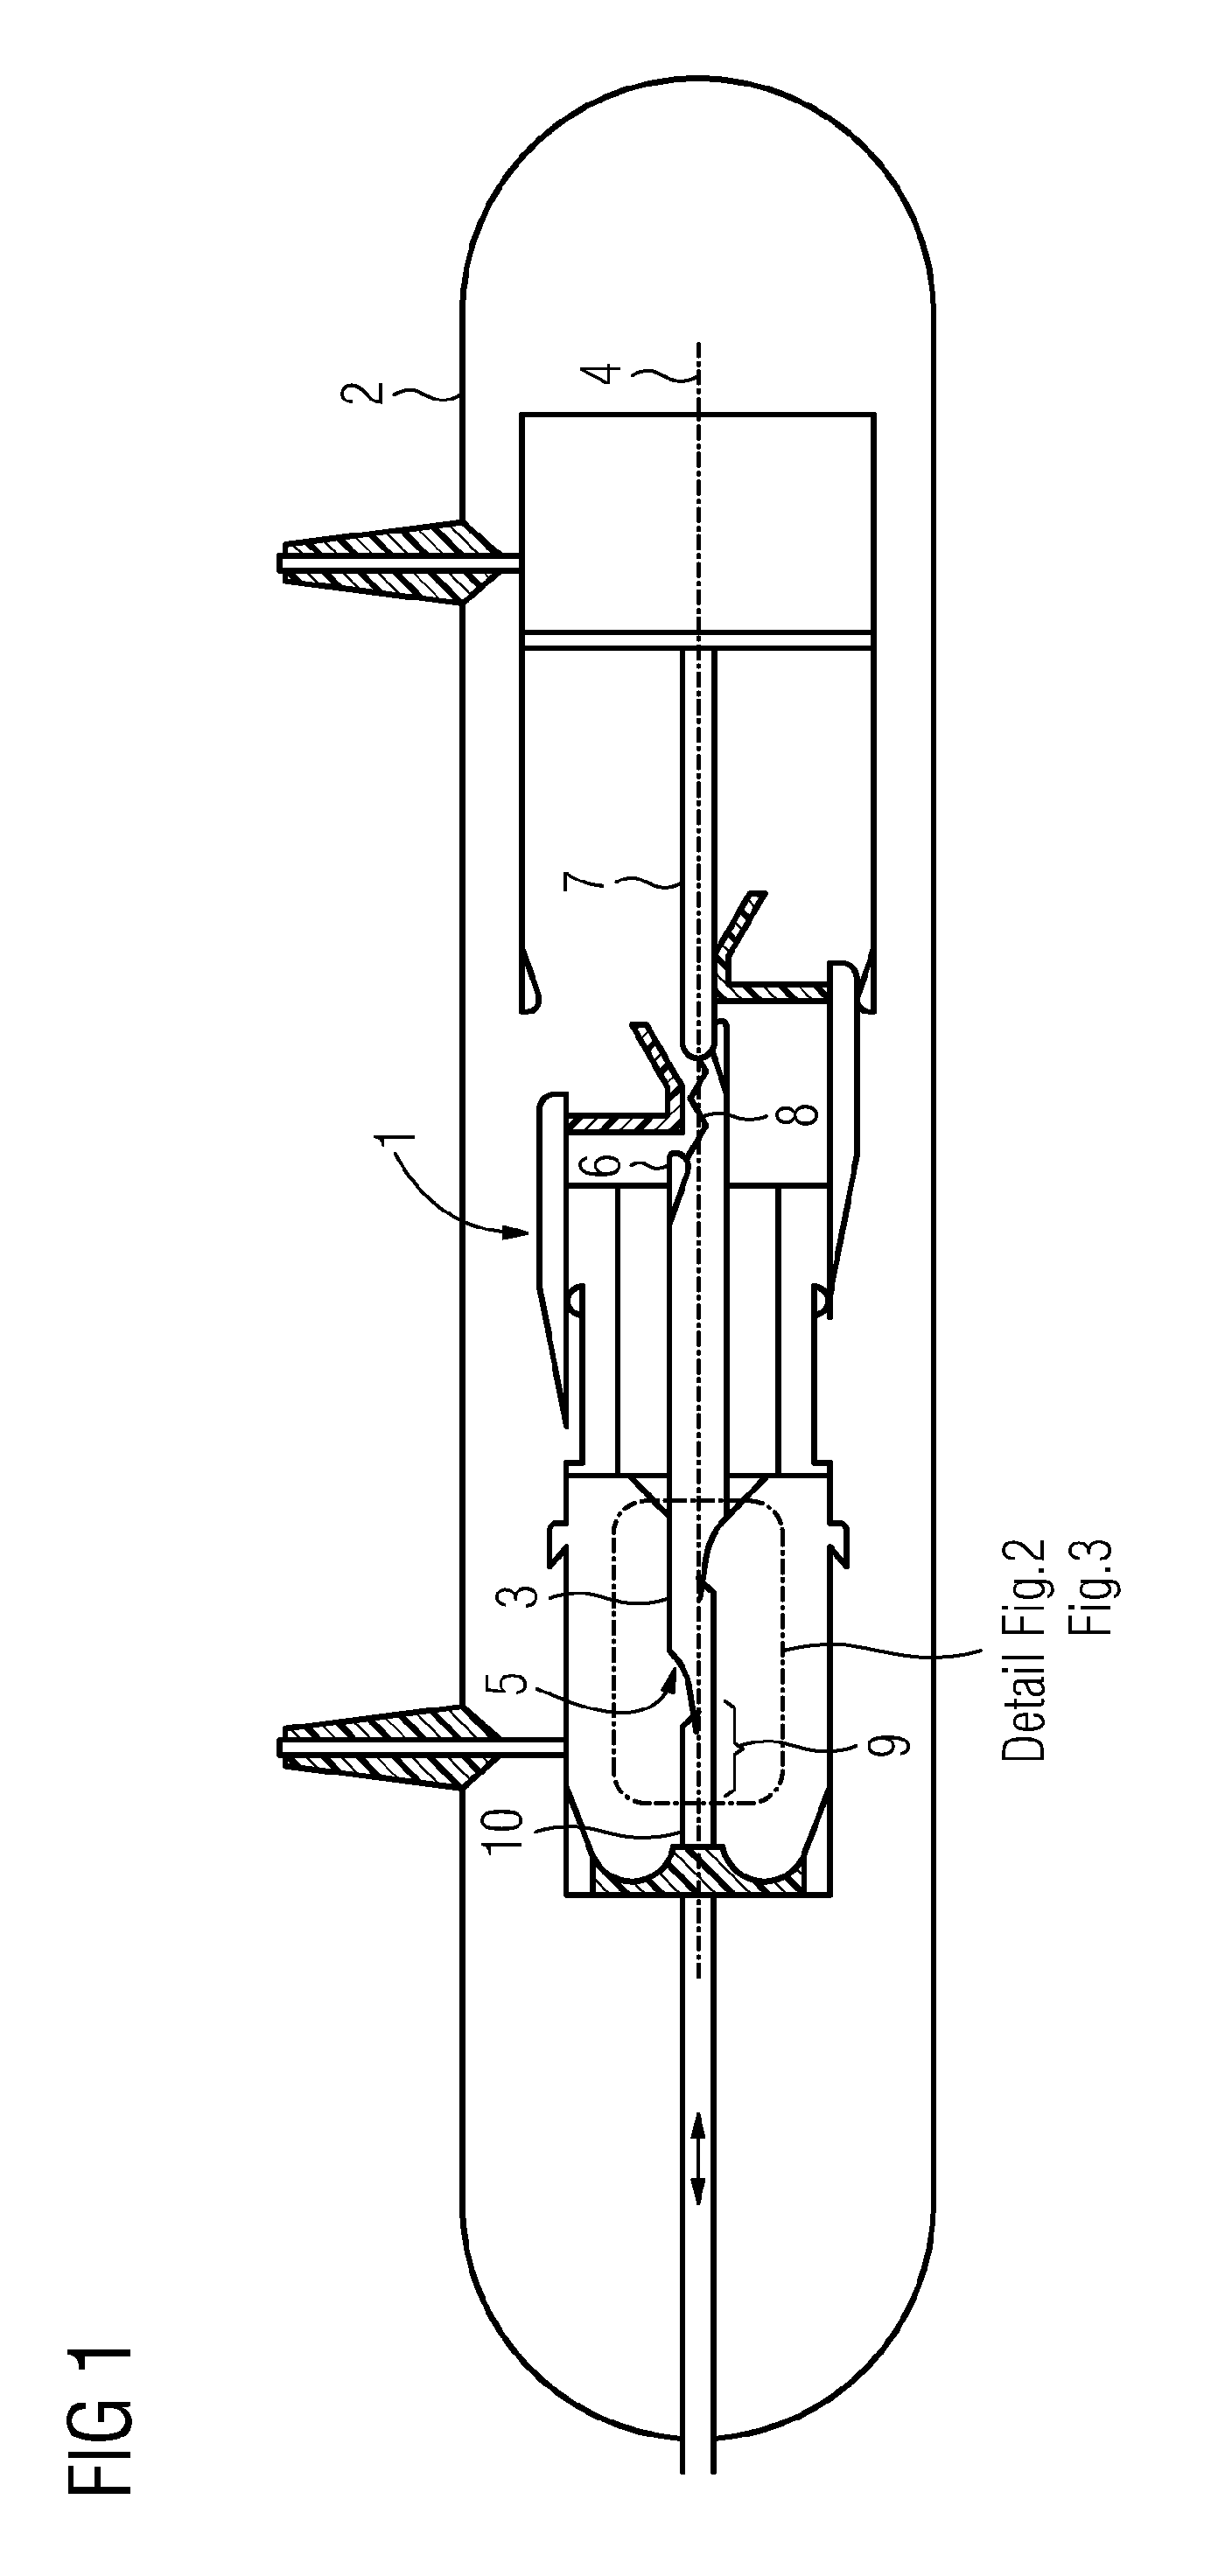 Interrupter arrangement having a movable switching tube